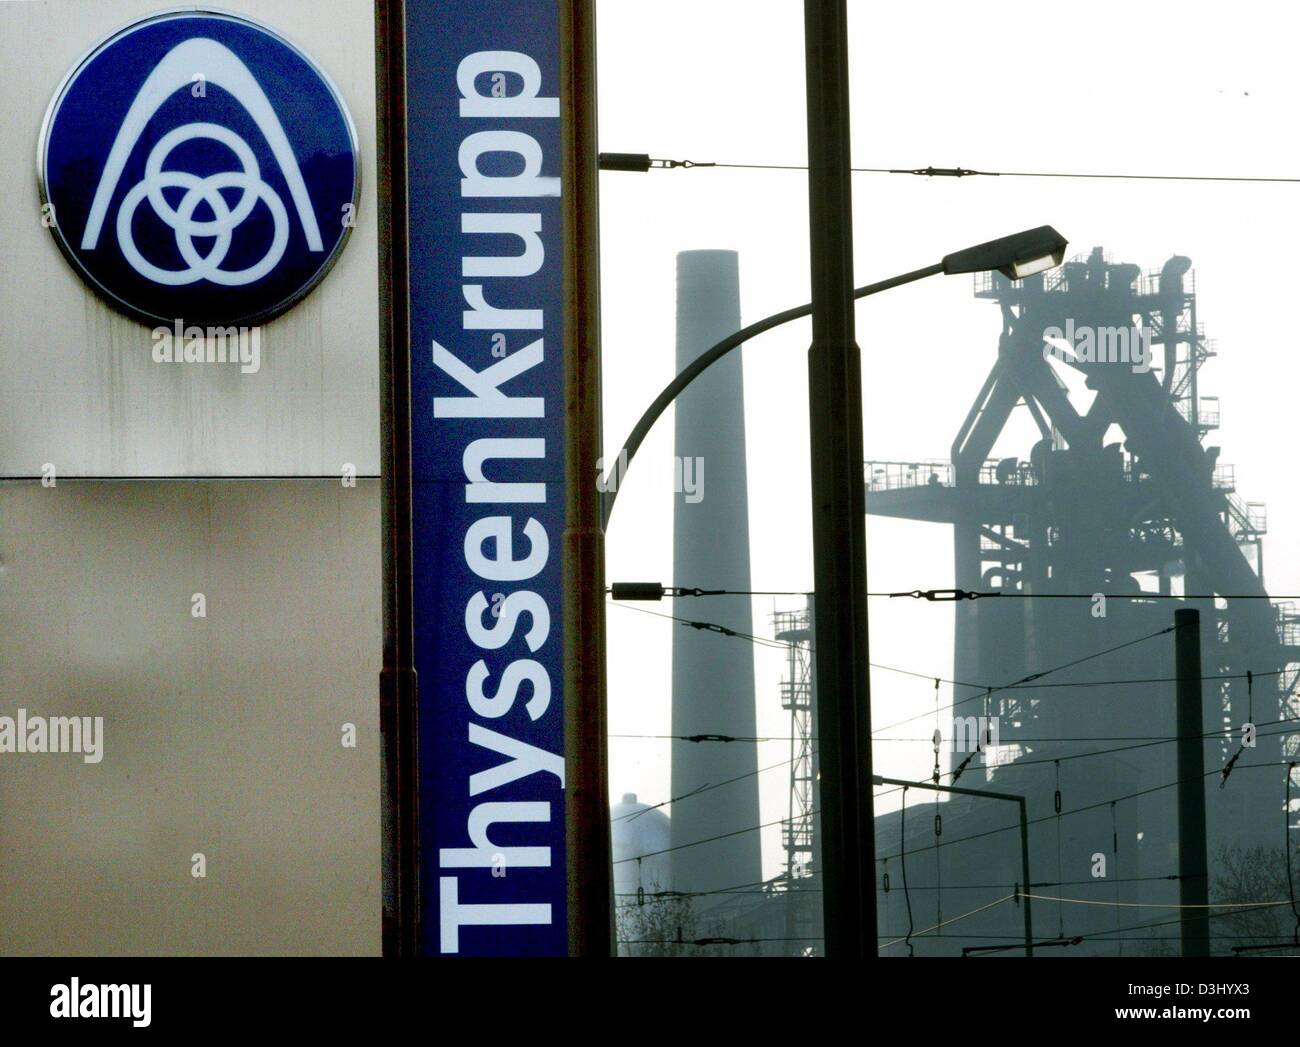 (dpa files) - The corporate logo of the ThyssenKrupp steelworks is seen in front of a furnace in Duisburg-Bruckhausen, Germany, 3 December 2003. On 23 January 2004 ThyssenKrupp affirmed their aim to achieve a gross result of close to a billion euros in the current 2003/2004 business year. The company also announced the key data for the first quarter of the current business year. Th Stock Photo